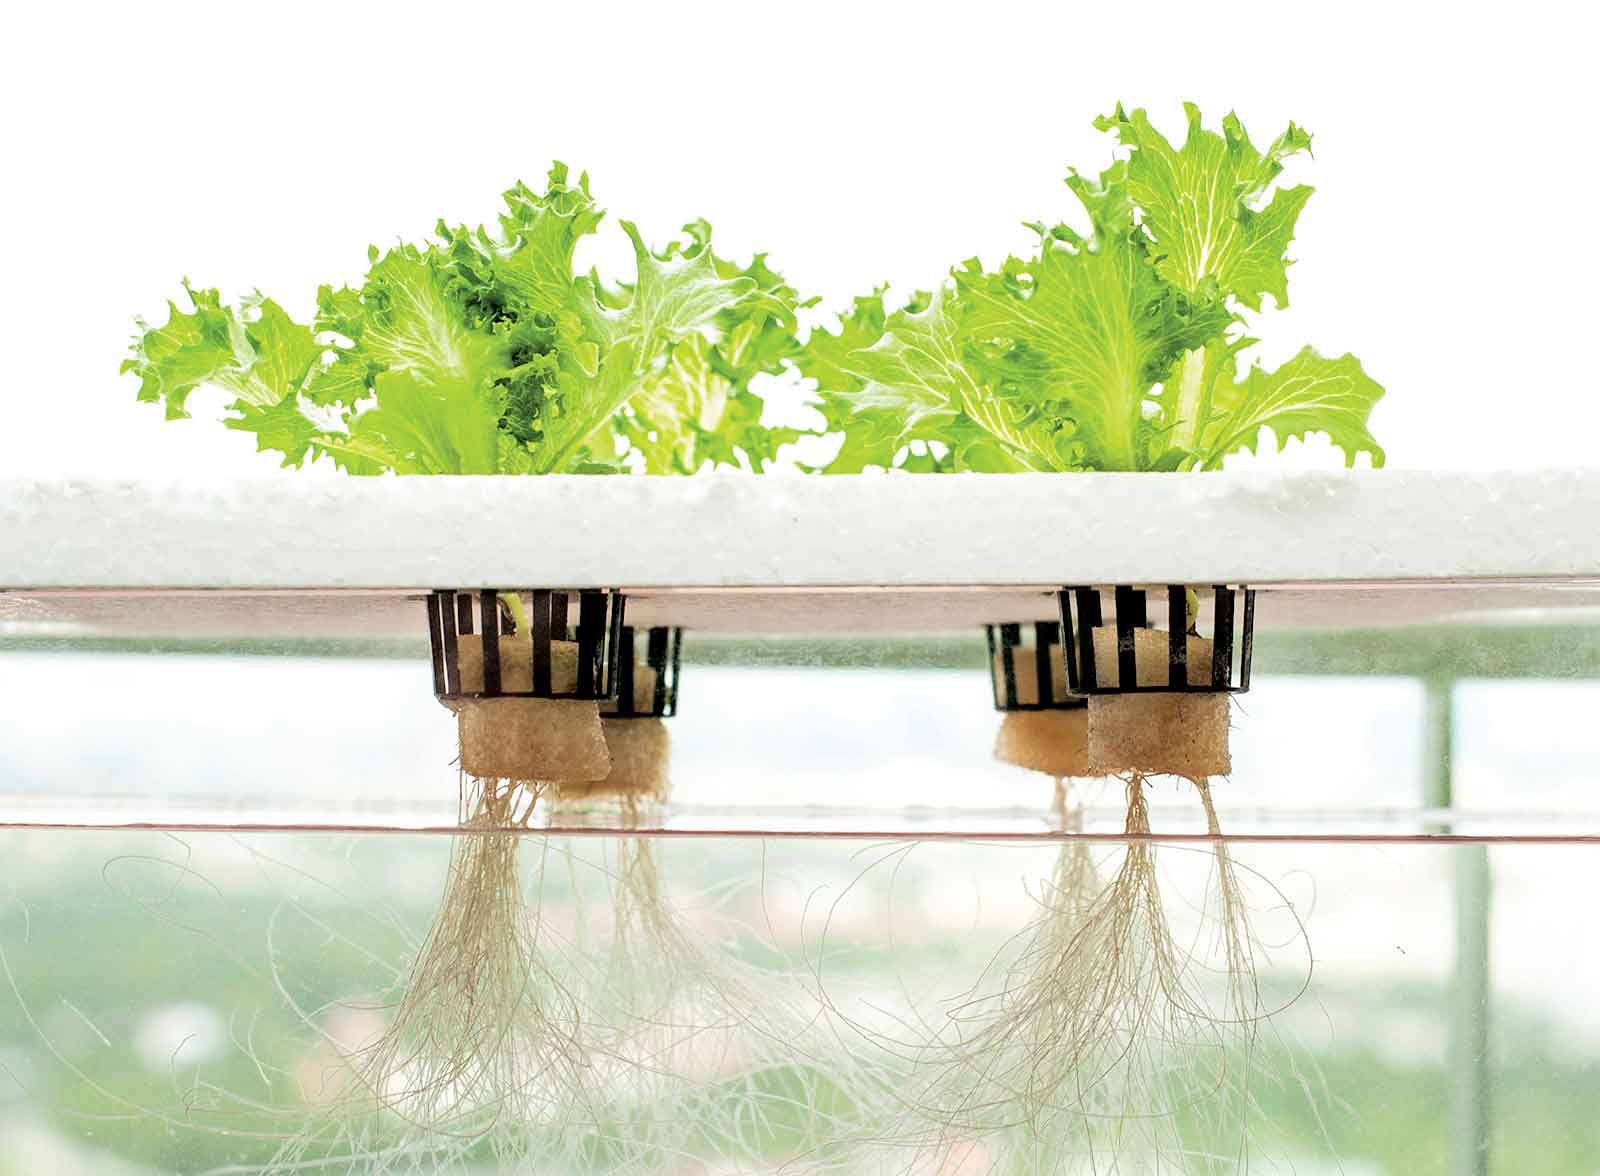 Hydroponics: The Art of Growing Plants Without Soil